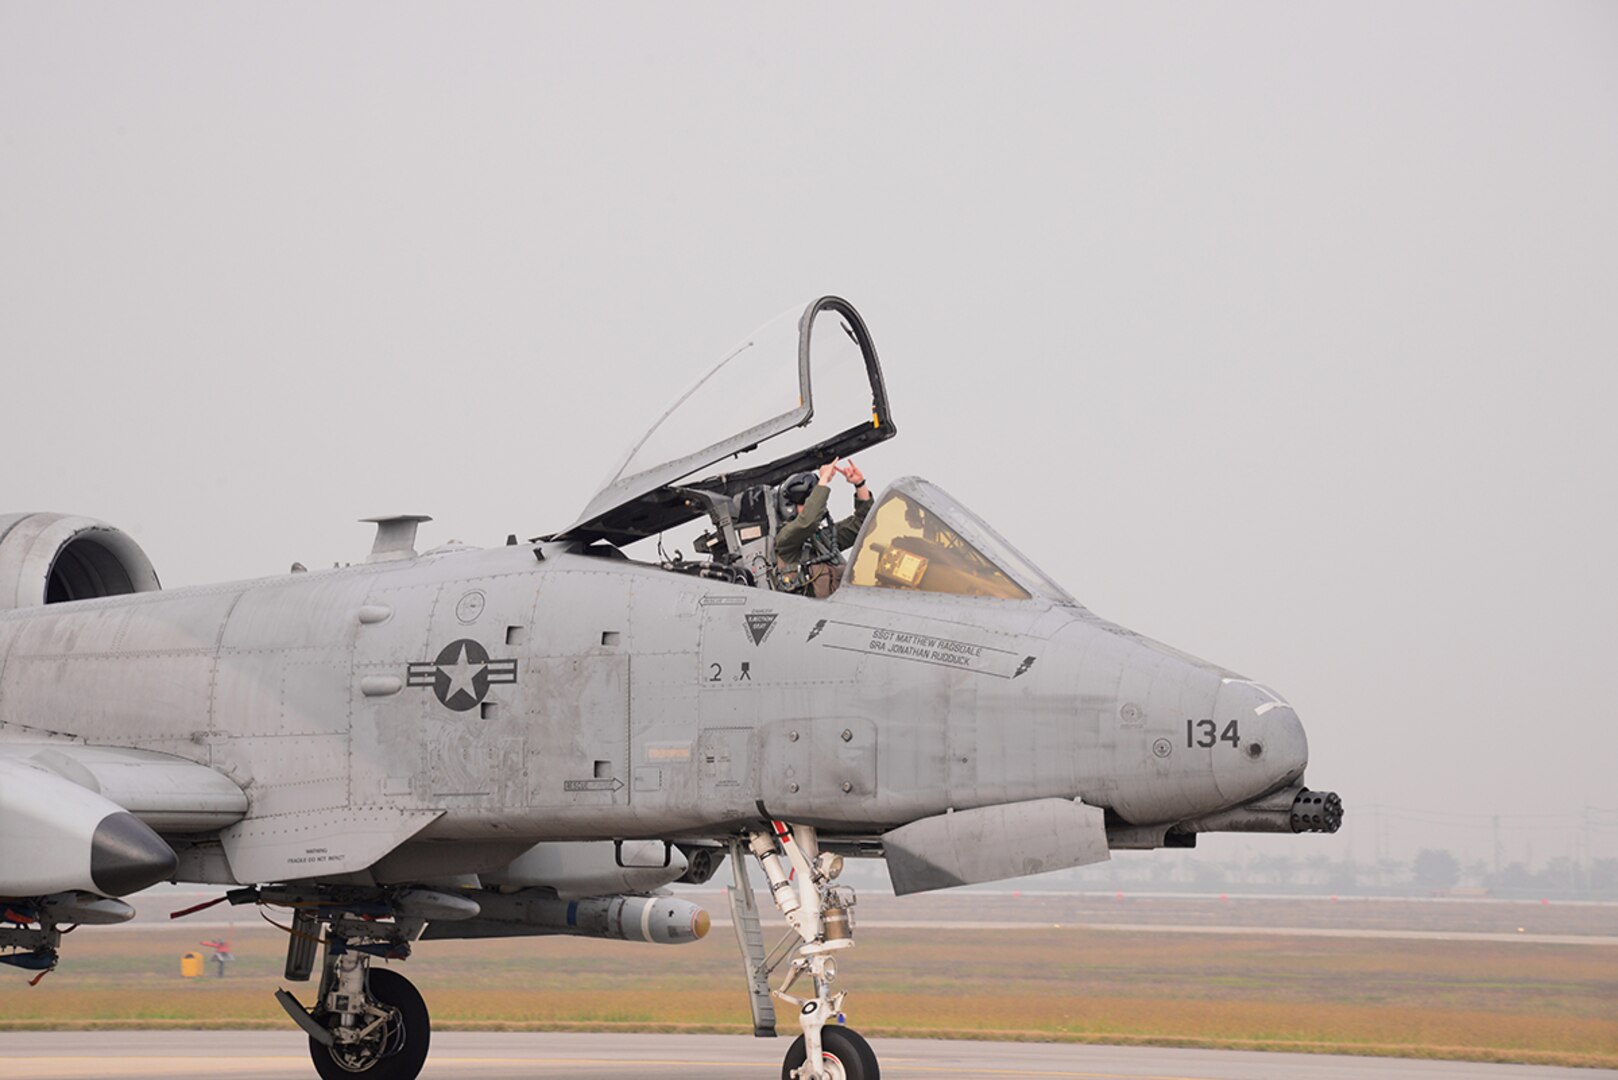 OSAN AIR BASE, Republic of Korea   (Oct. 16, 2015) - A pilot taxis an A-10 Thunderbolt II along the runway.   A-10s from the 25th Fighter Squadron participated in the combat search and rescue exercise Pacific Thunder 15-02. Exercise Pacific Thunder brought together U.S. forces from the Air Force, Marines, and units from the Republic of Korea air force to practice air combat and CSAR by focusing on enhancing interoperability and combat readiness of the military alliance across the Korean Peninsula. 